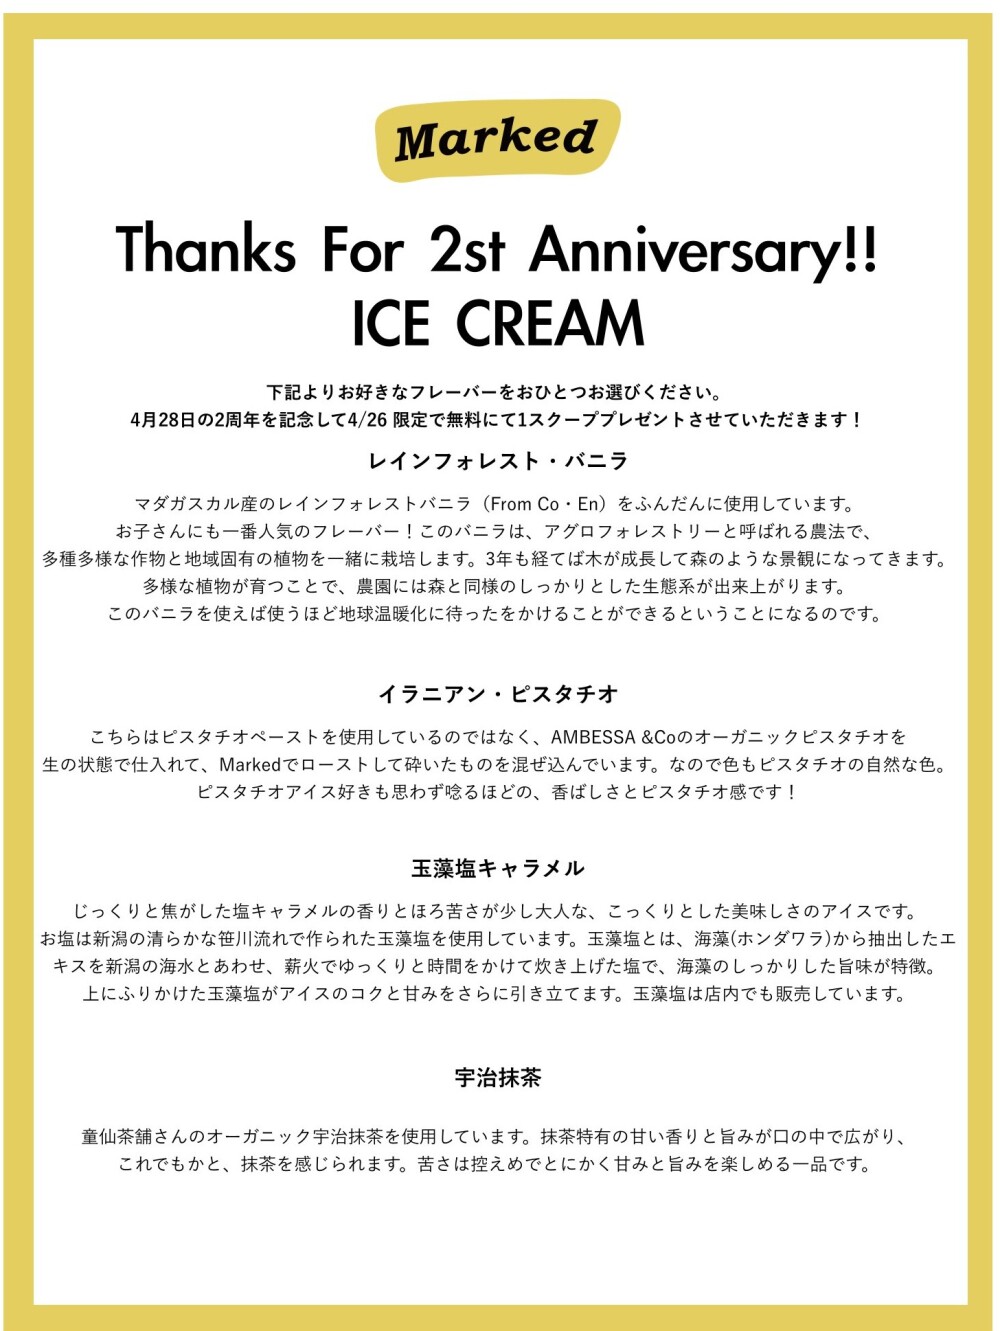 【Marked】Thanks For 2st Anniversary!!  ICE CREAM